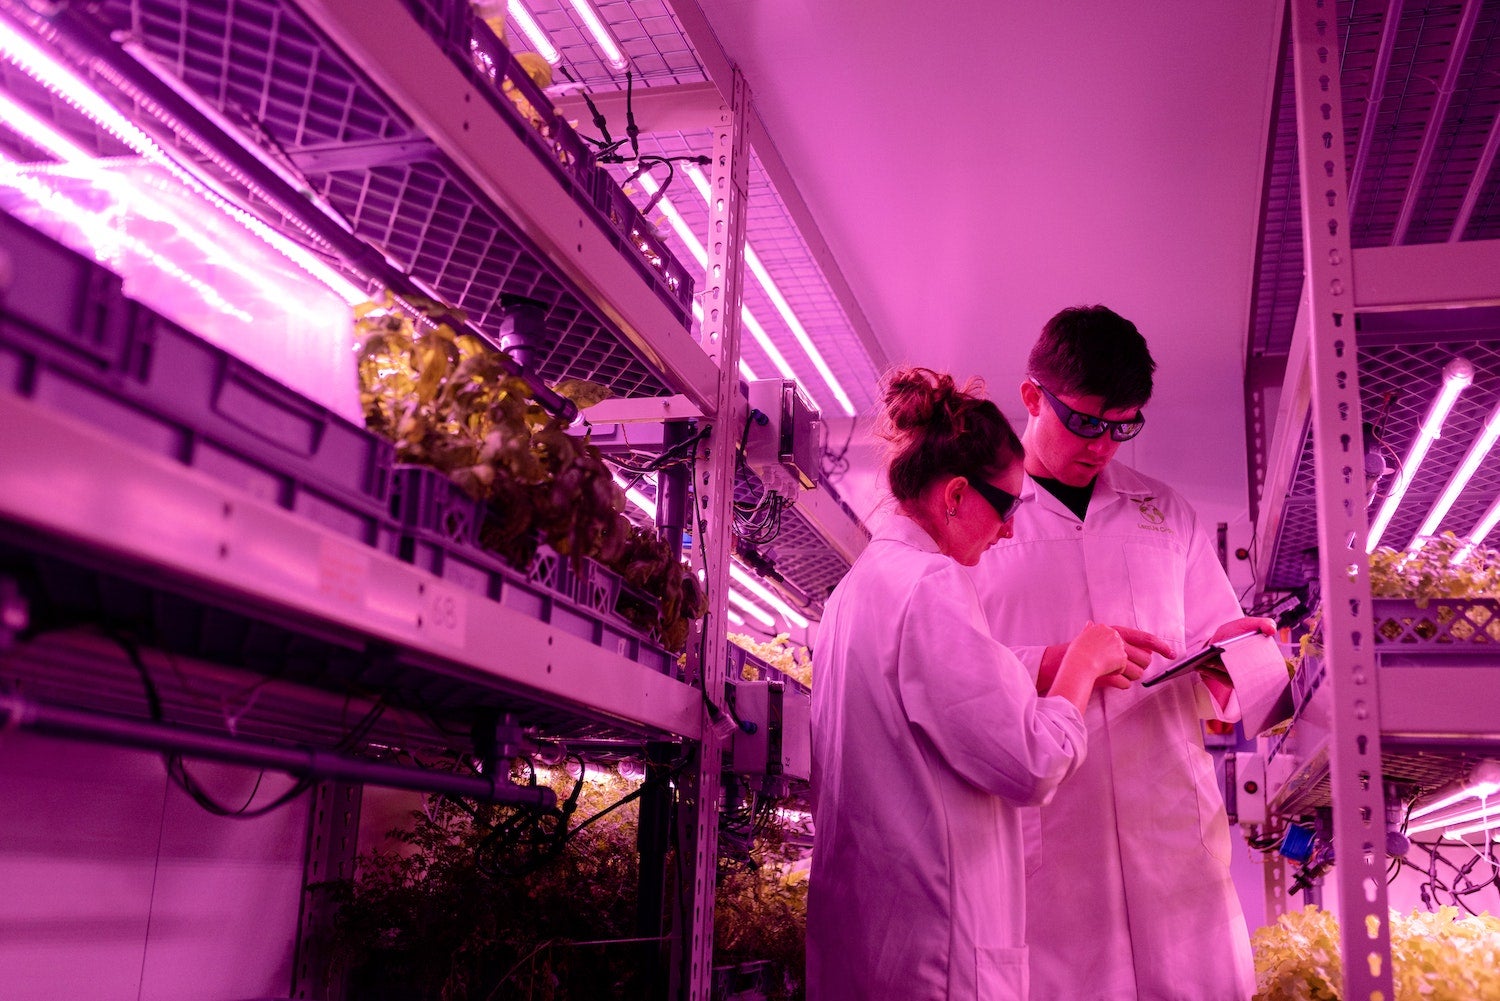 Stock image of a man and woman in high-tech food growing environment with pink lighting